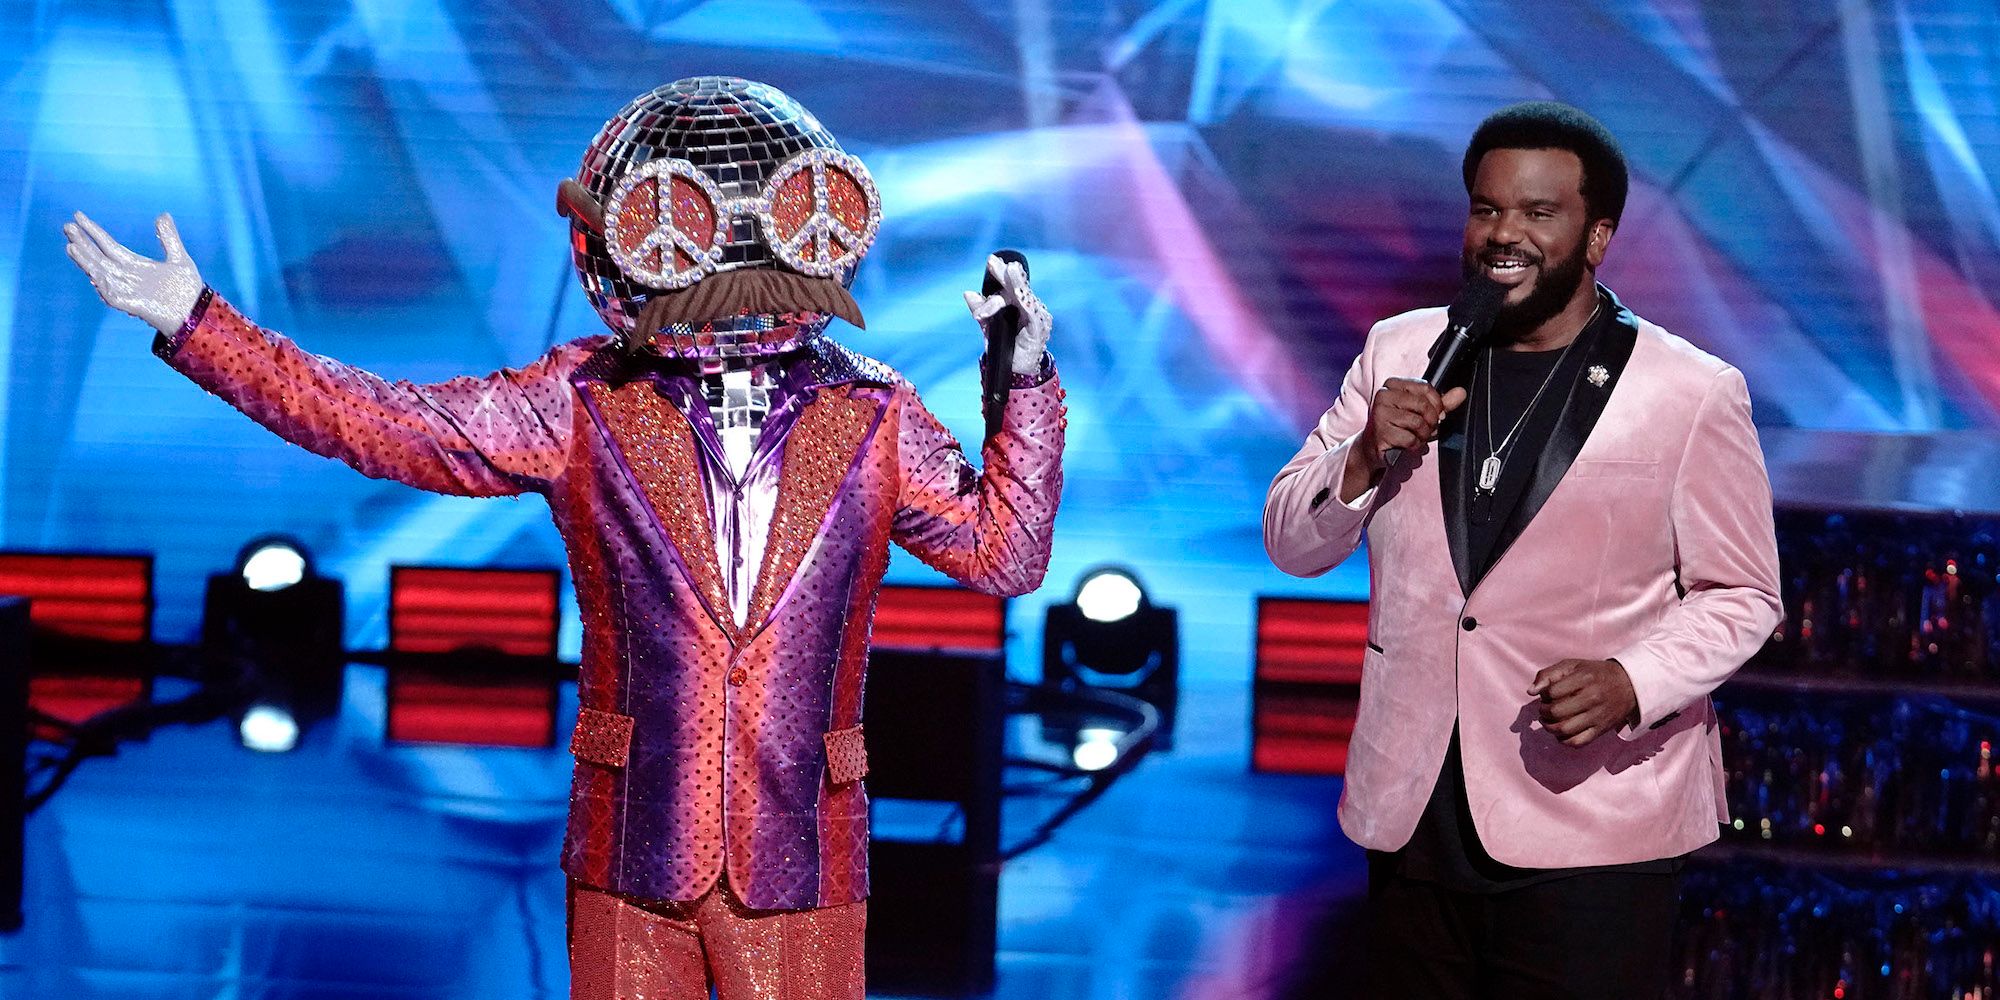 The Masked Singer Season 5: Renewal, Possible Release Date & Costumes, News Updates